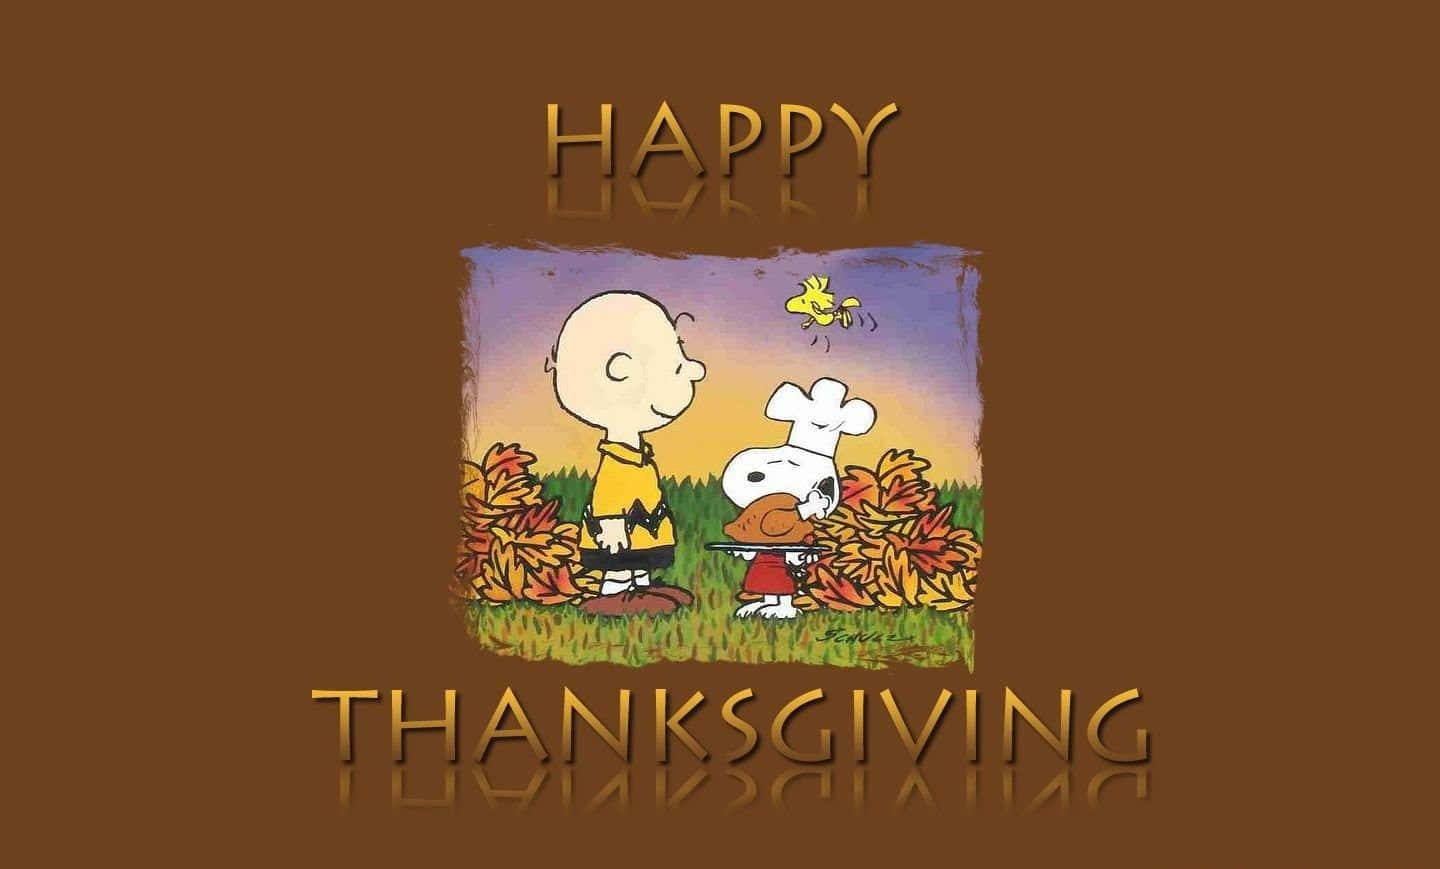 "Let's give thanks (literally) for this Funny Thanksgiving meal!" Wallpaper